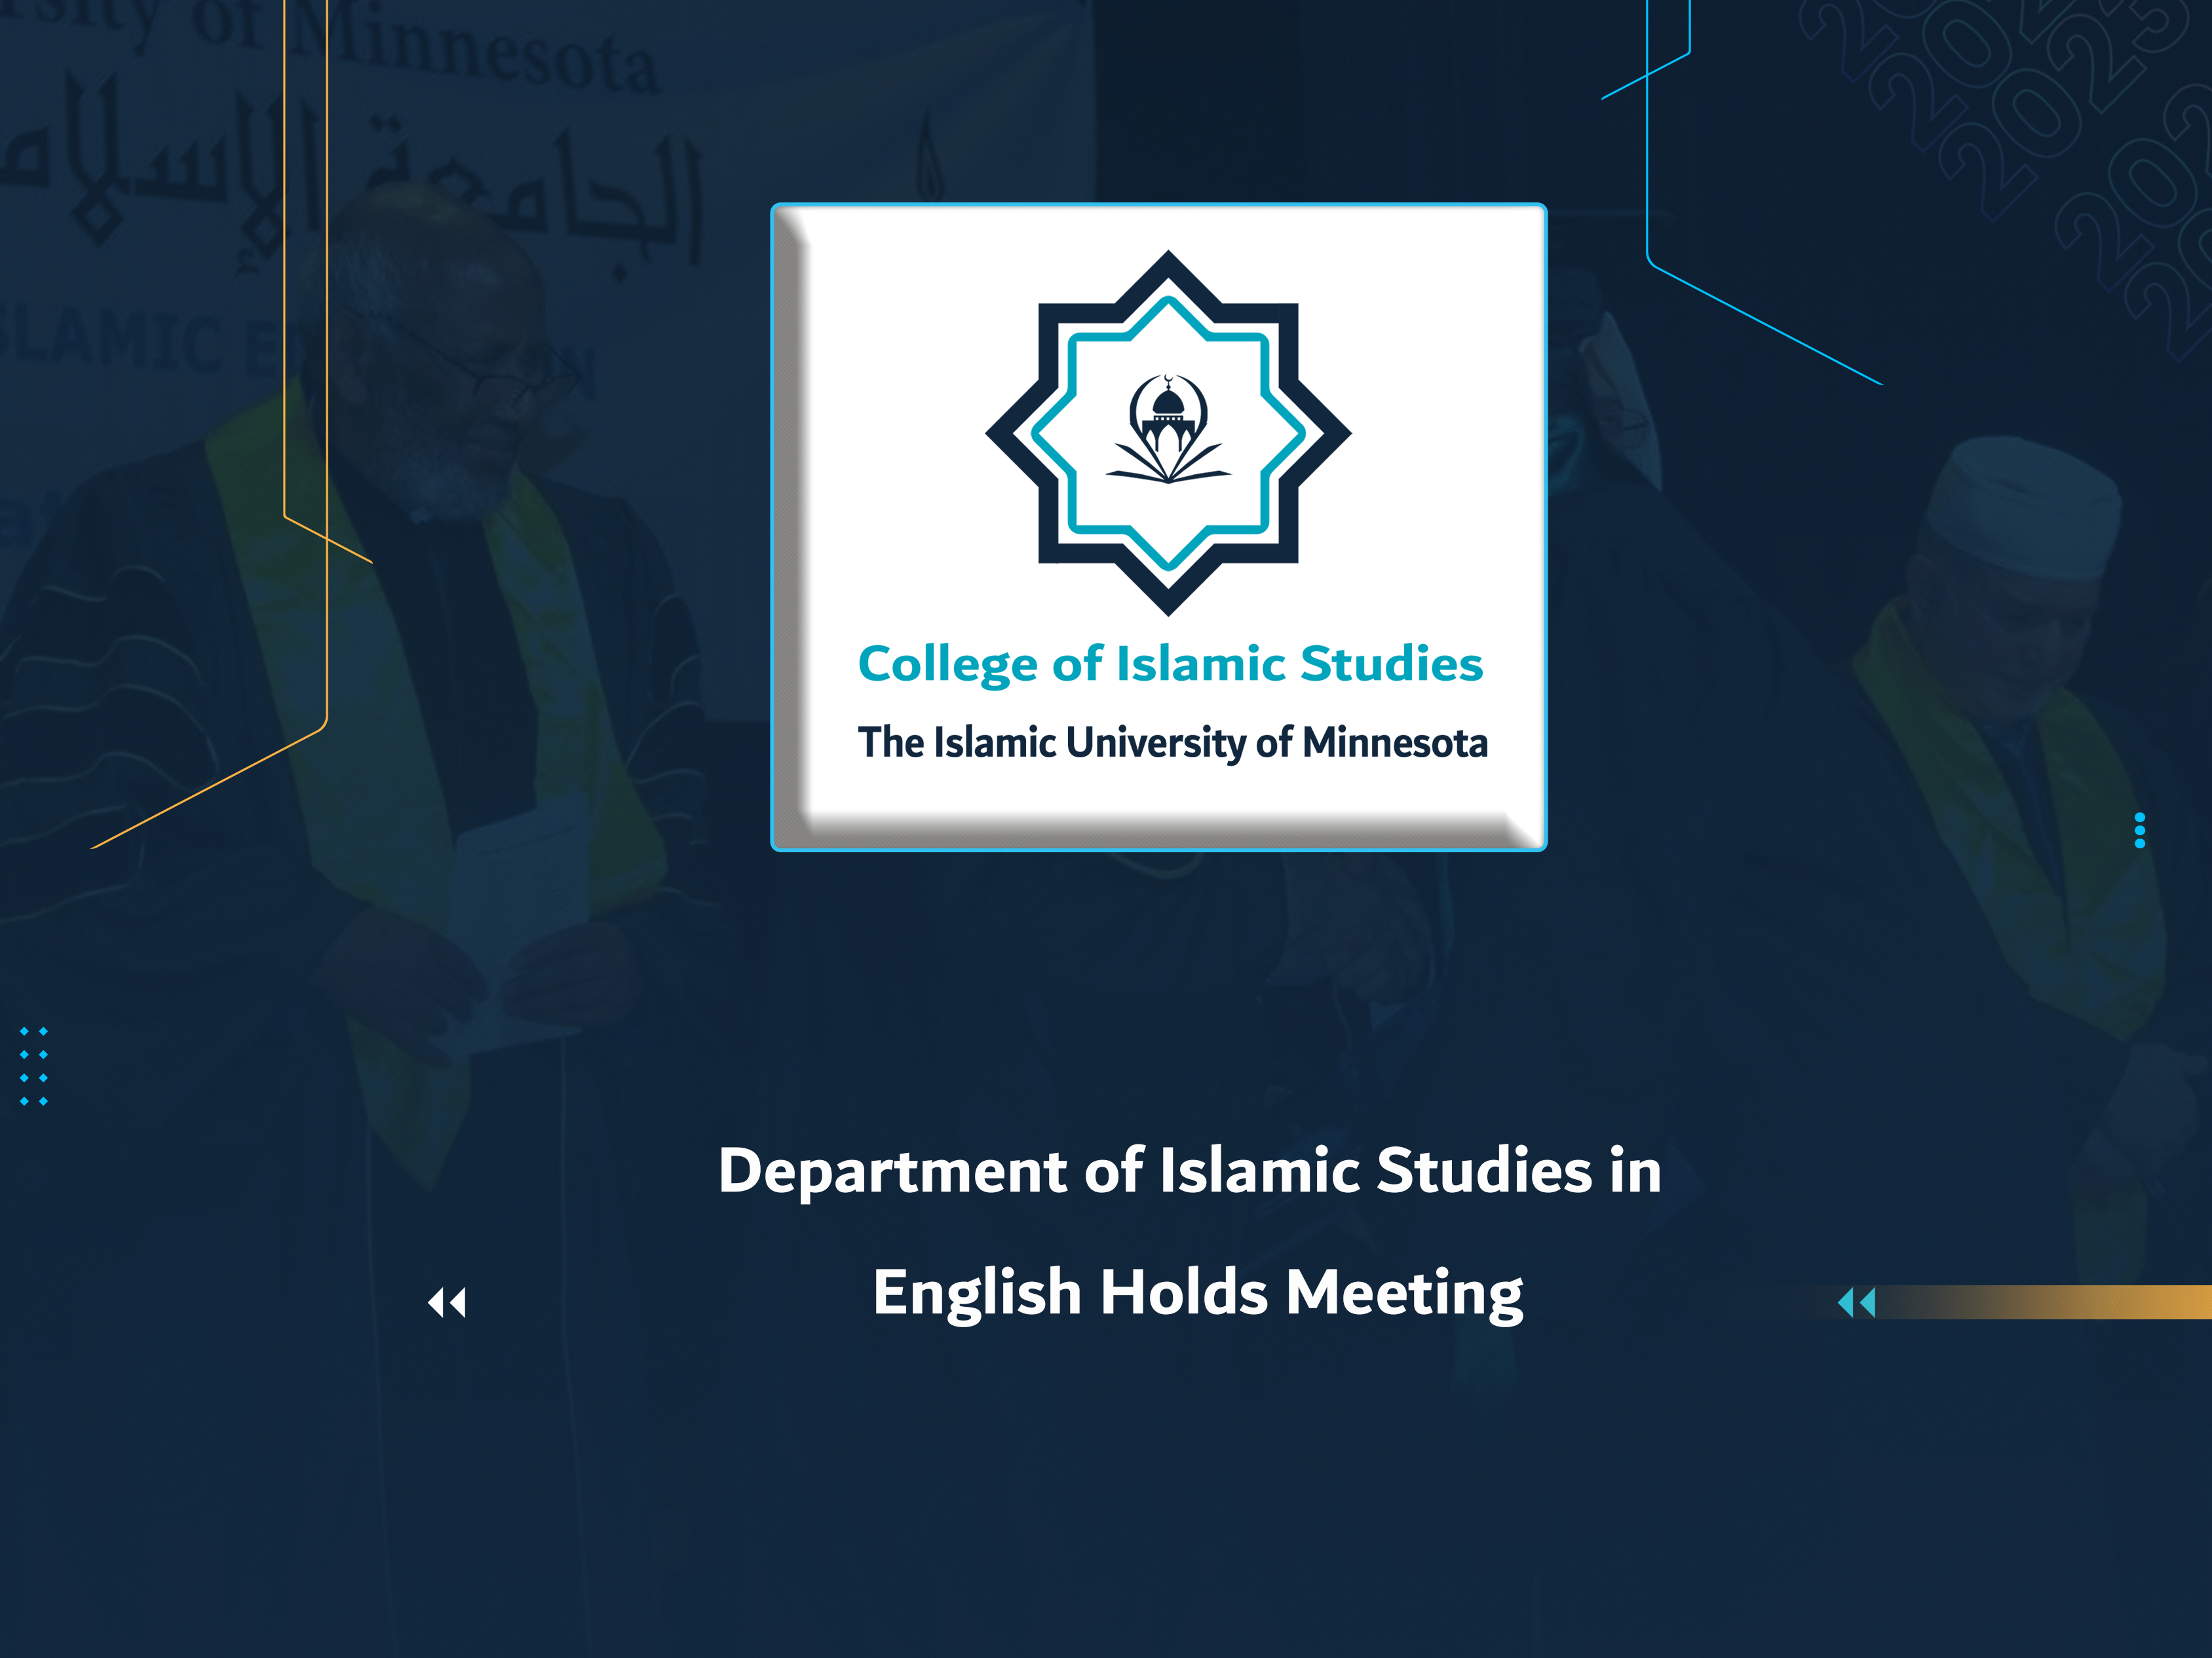 Department of Islamic Studies in English Holds Meeting